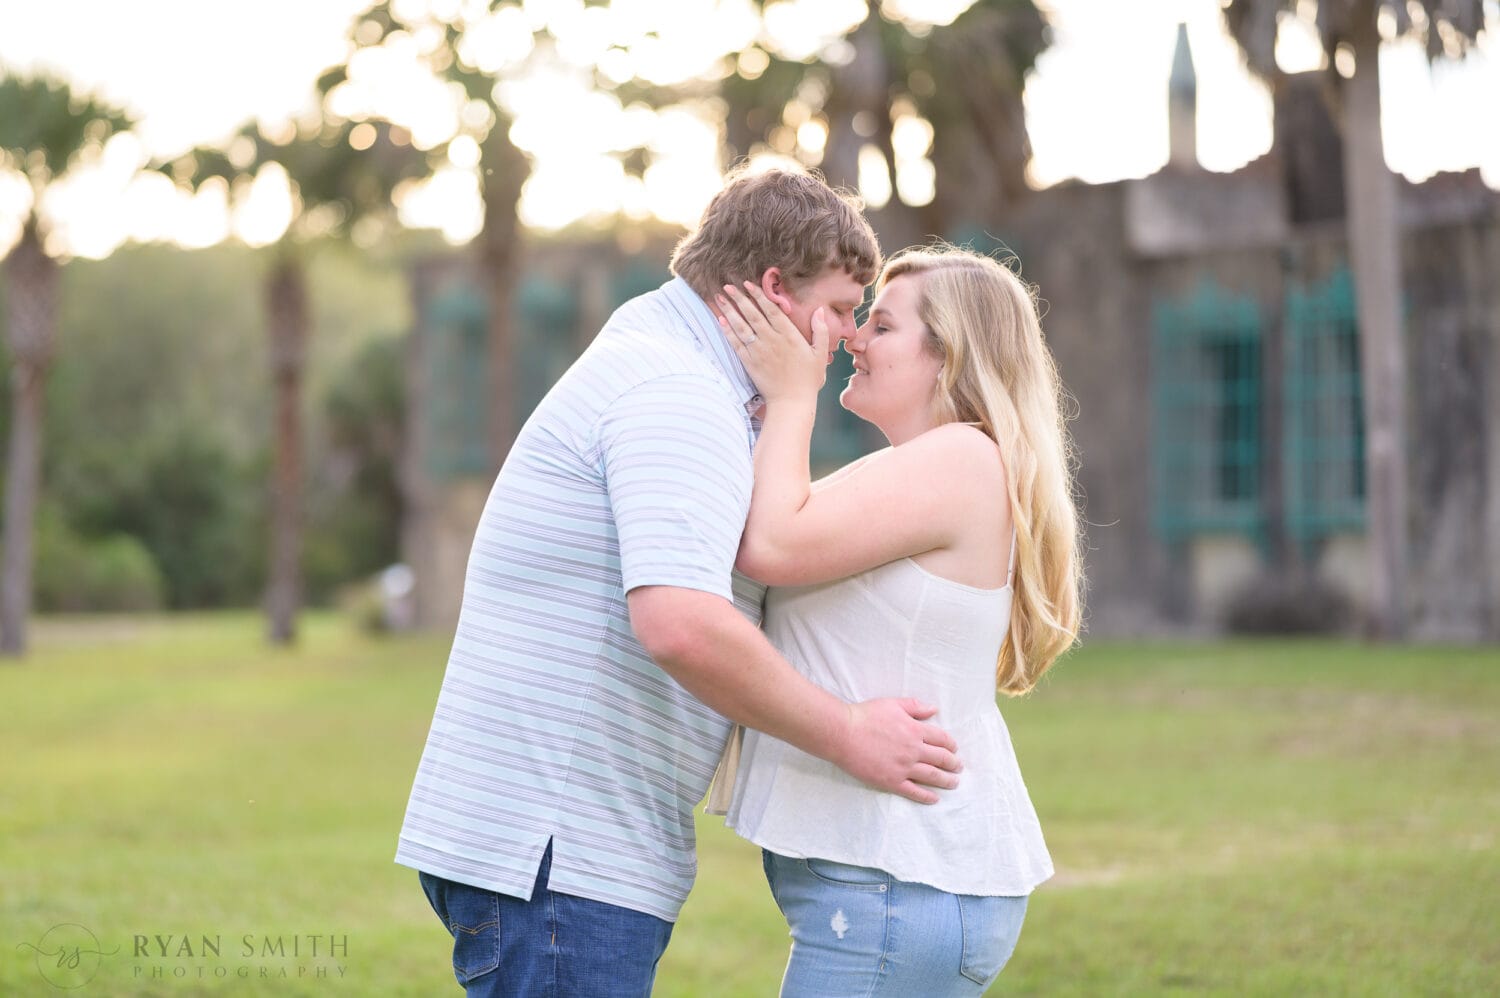 Engagement pictures on the beach - Huntington Beach State Park